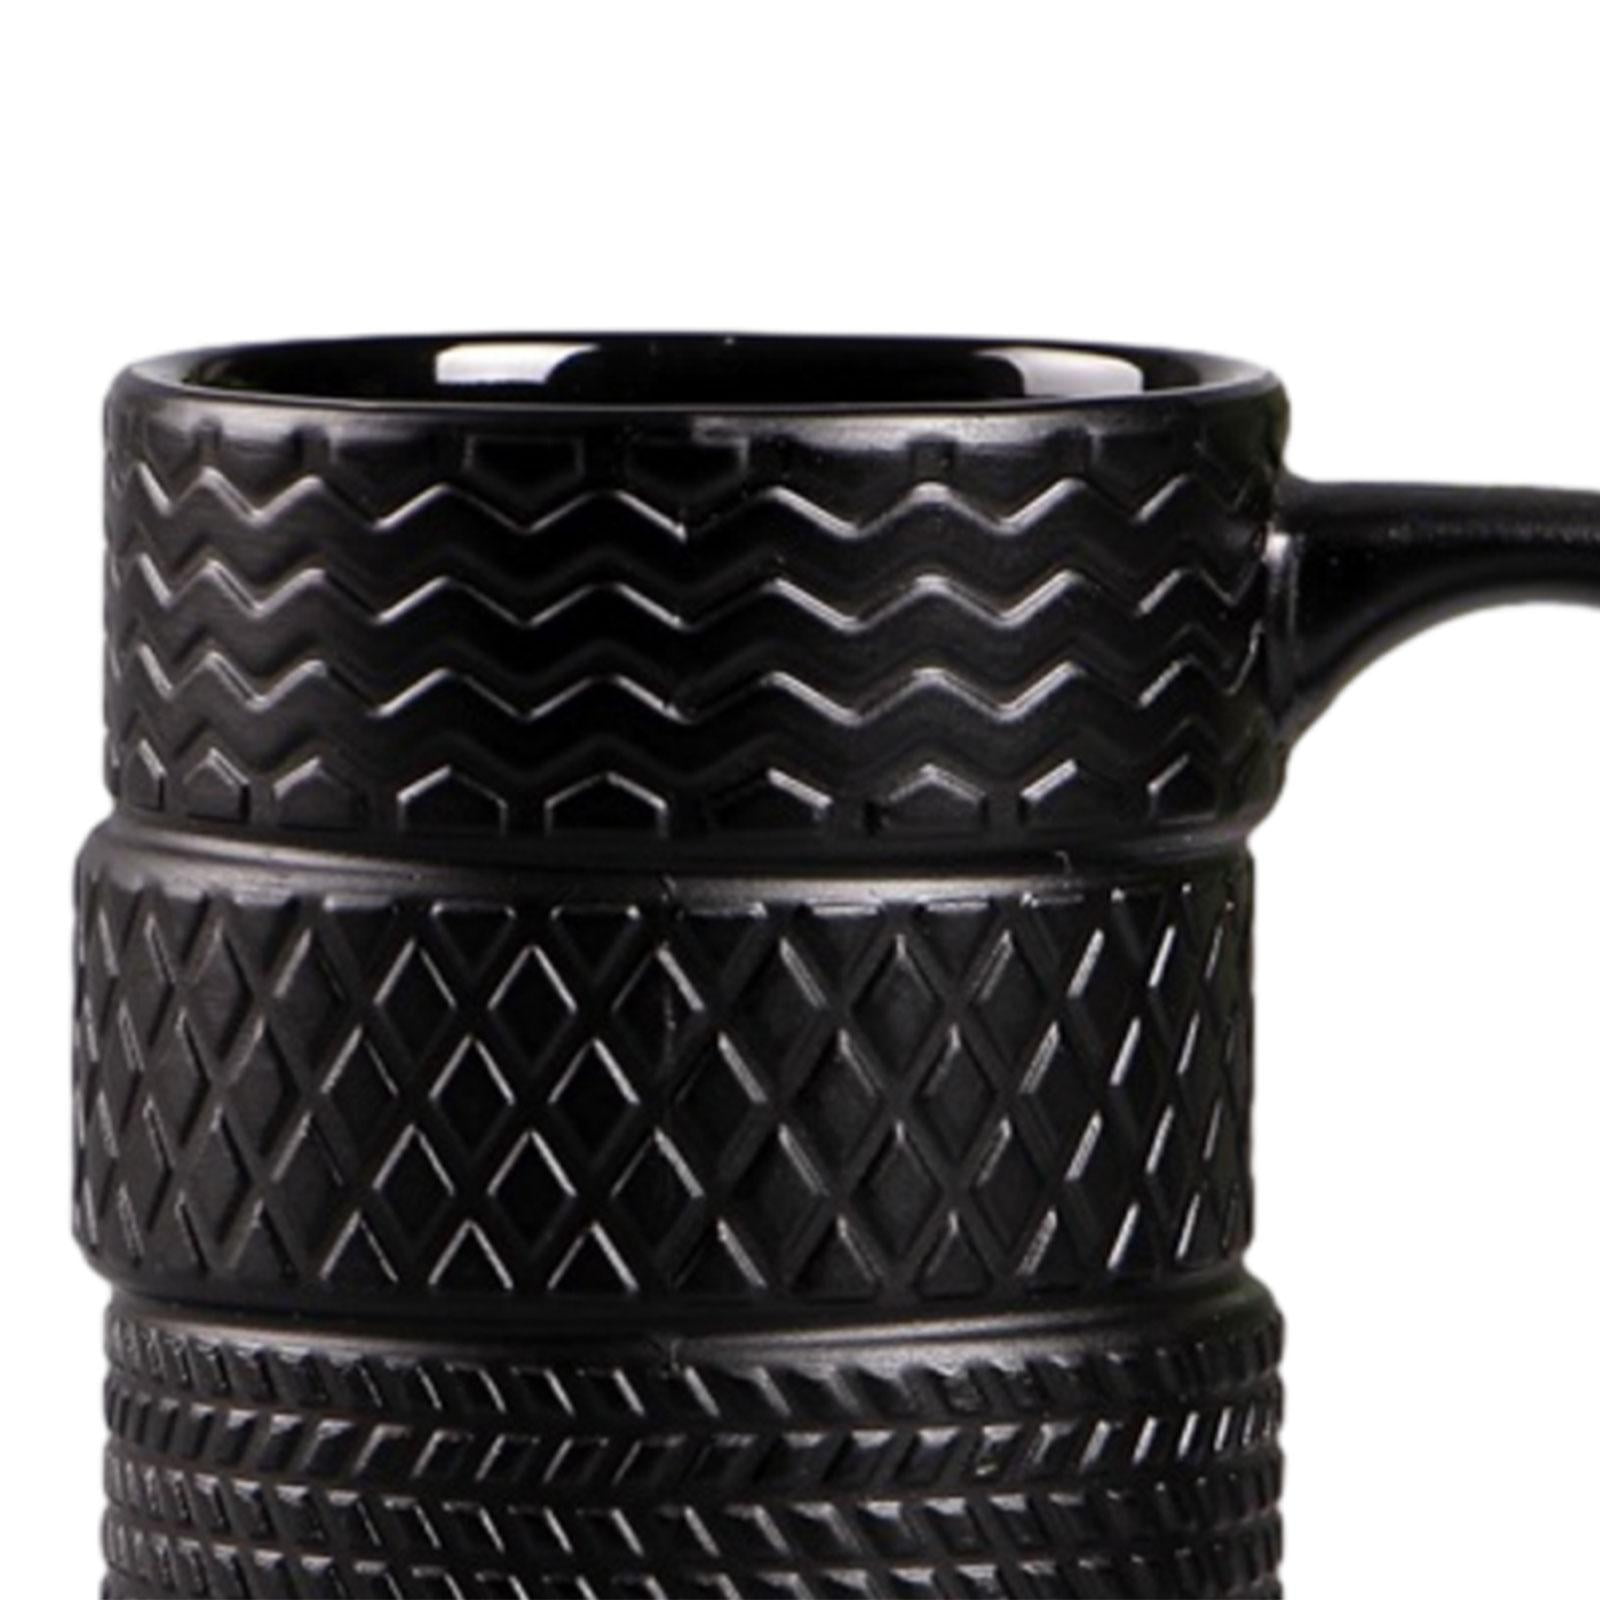 Tire Coffee Mug Beverage Cup for Men Comfortable Handle 450ml Drinking Cup